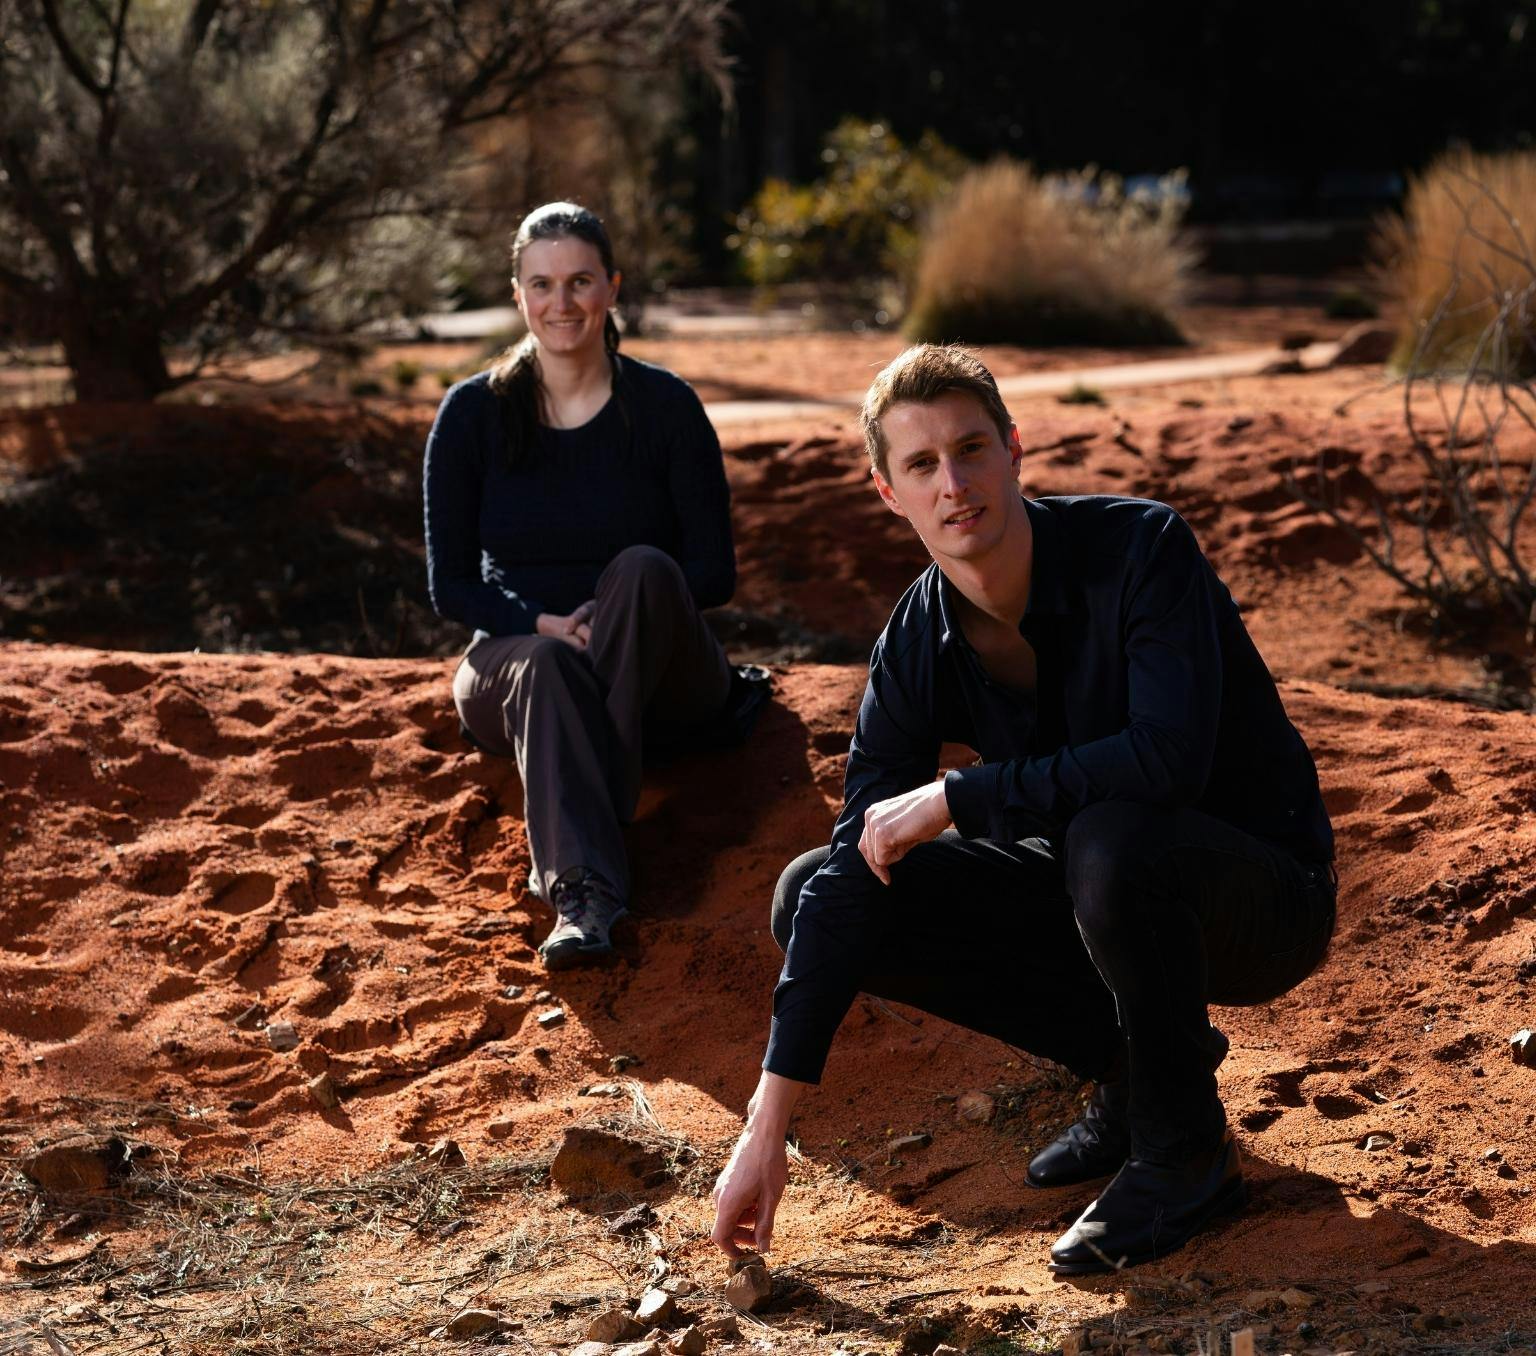 Dr Emma Tucker, wearing dark clothes, sits on a mound of red dirt. Dr Lex van Loon, also wearing dark clothing, squats in front of her, touching a rock on the ground. Behind them is red dirt and shrubs.